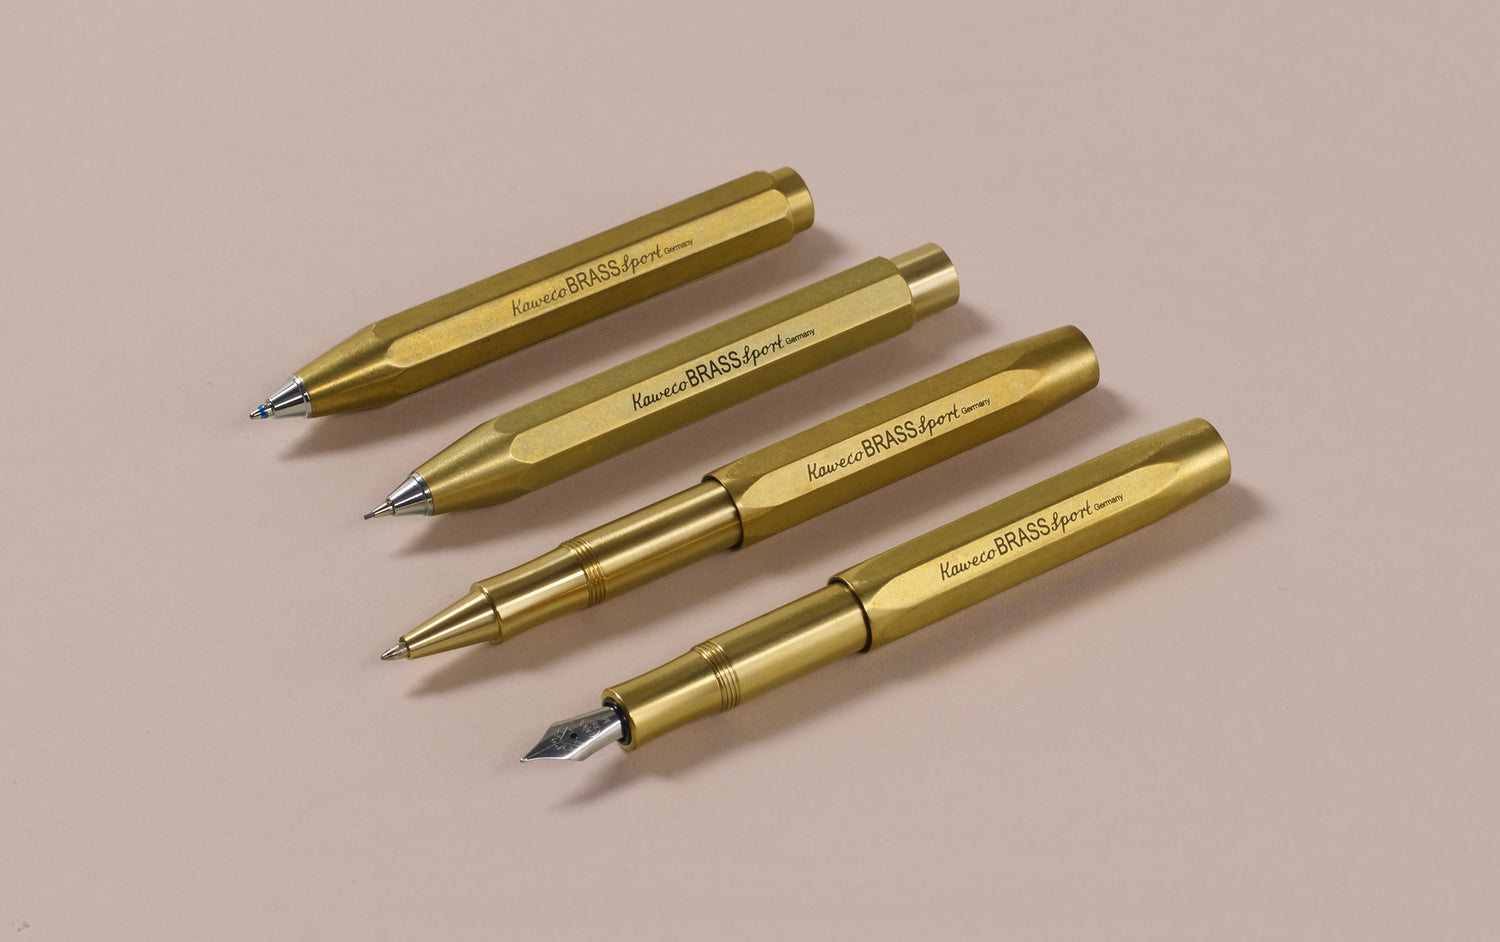 KAWECO BRASS SPORT FOUNTAIN PEN – The Frostery Living